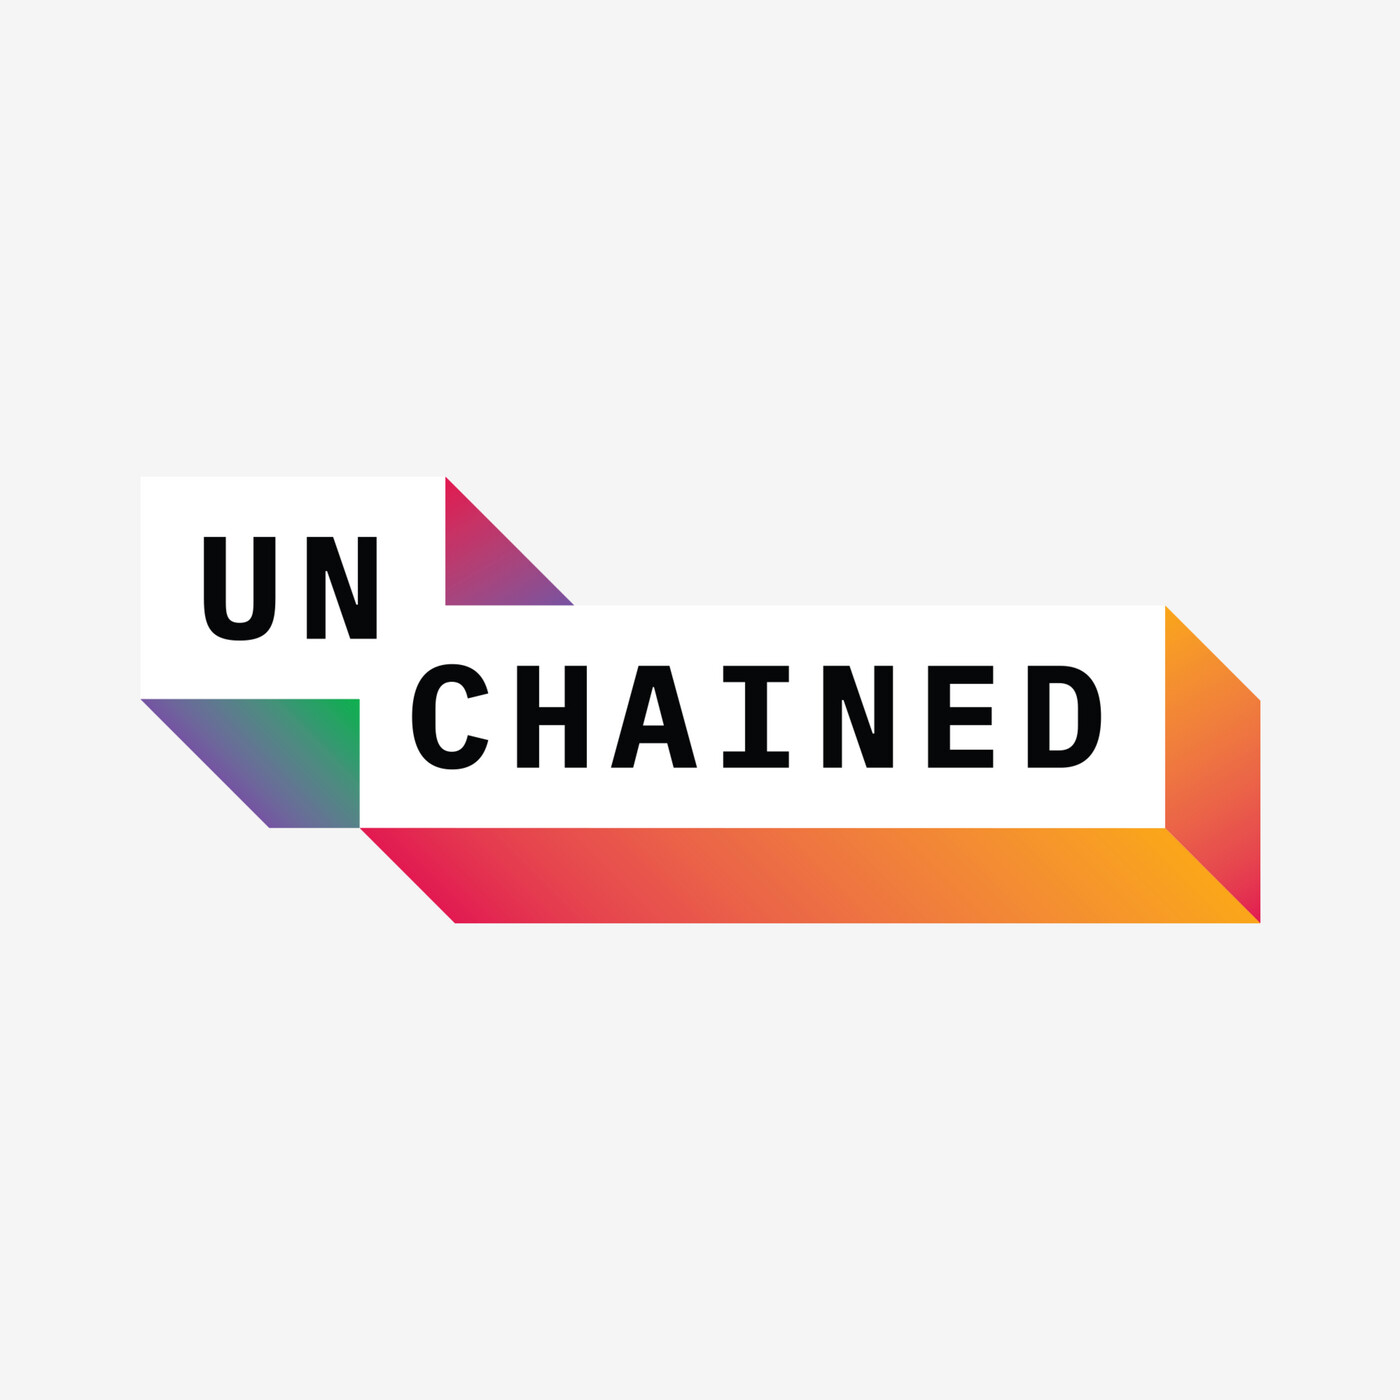 UNCHAINED: Why EigenLayer Gave Away More Tokens After Widespread Criticism of Its Stakedrop